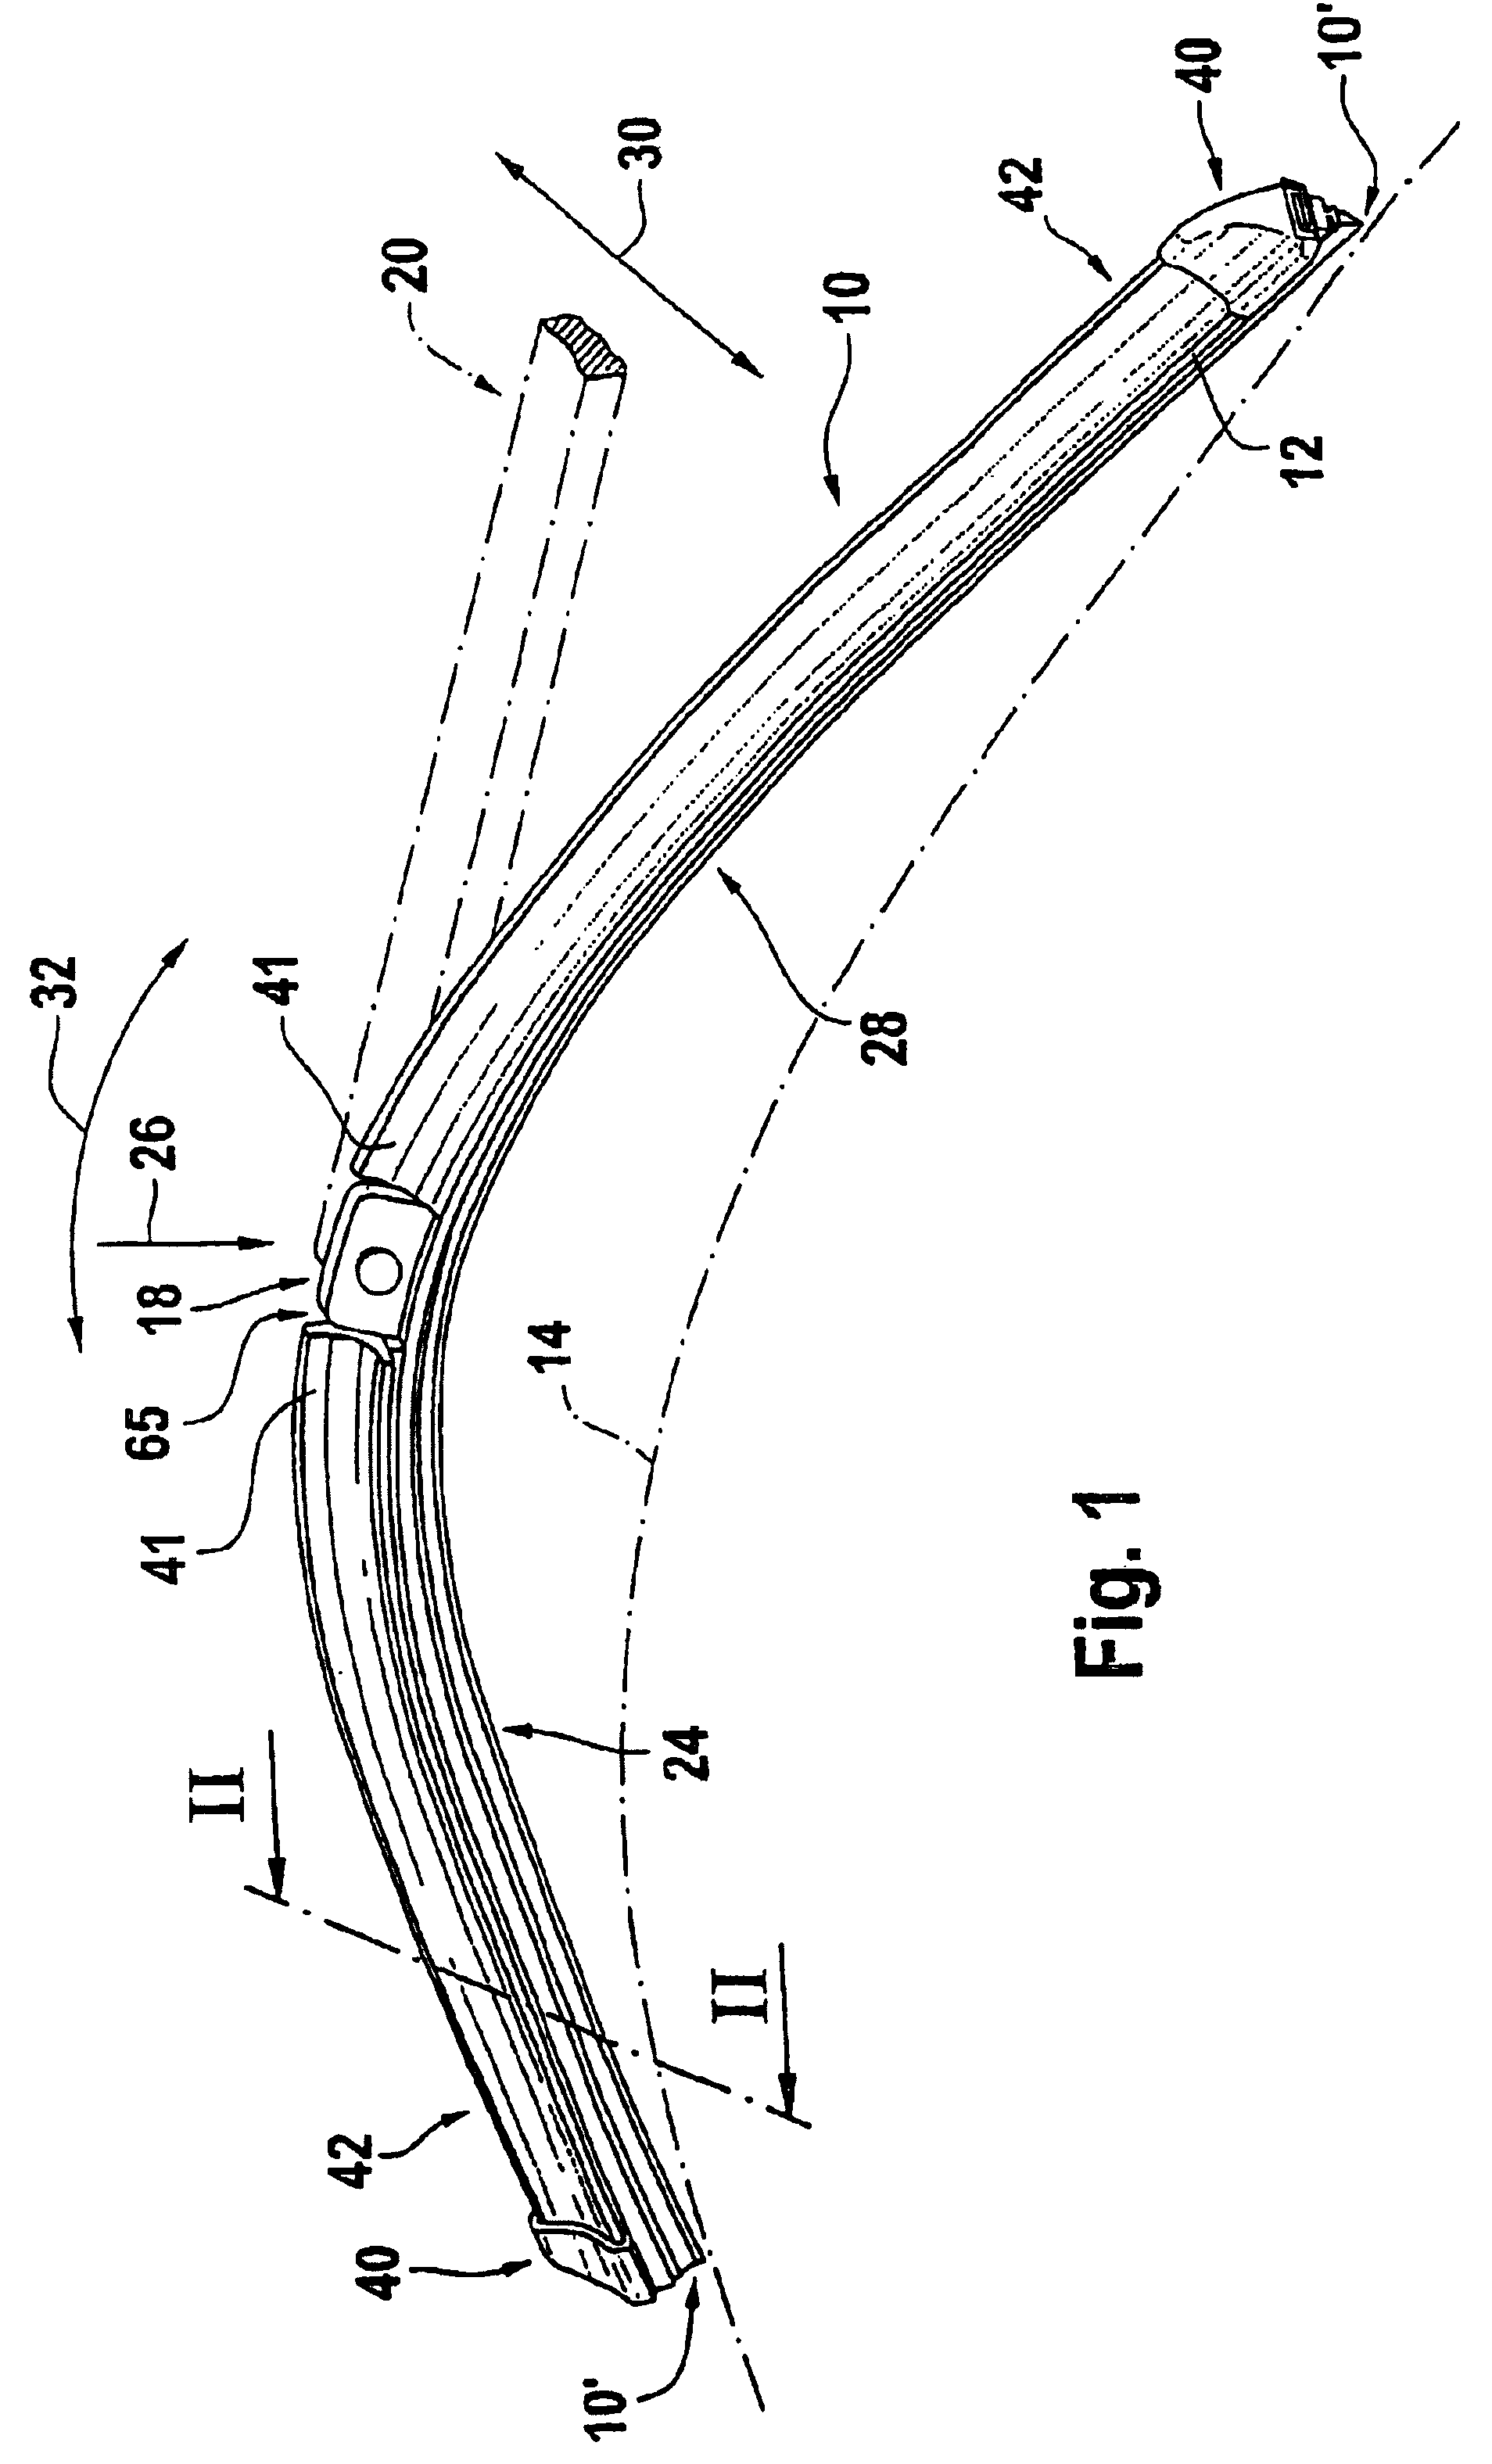 Wiper blade for cleaning panes, in particular of a motor vehicle